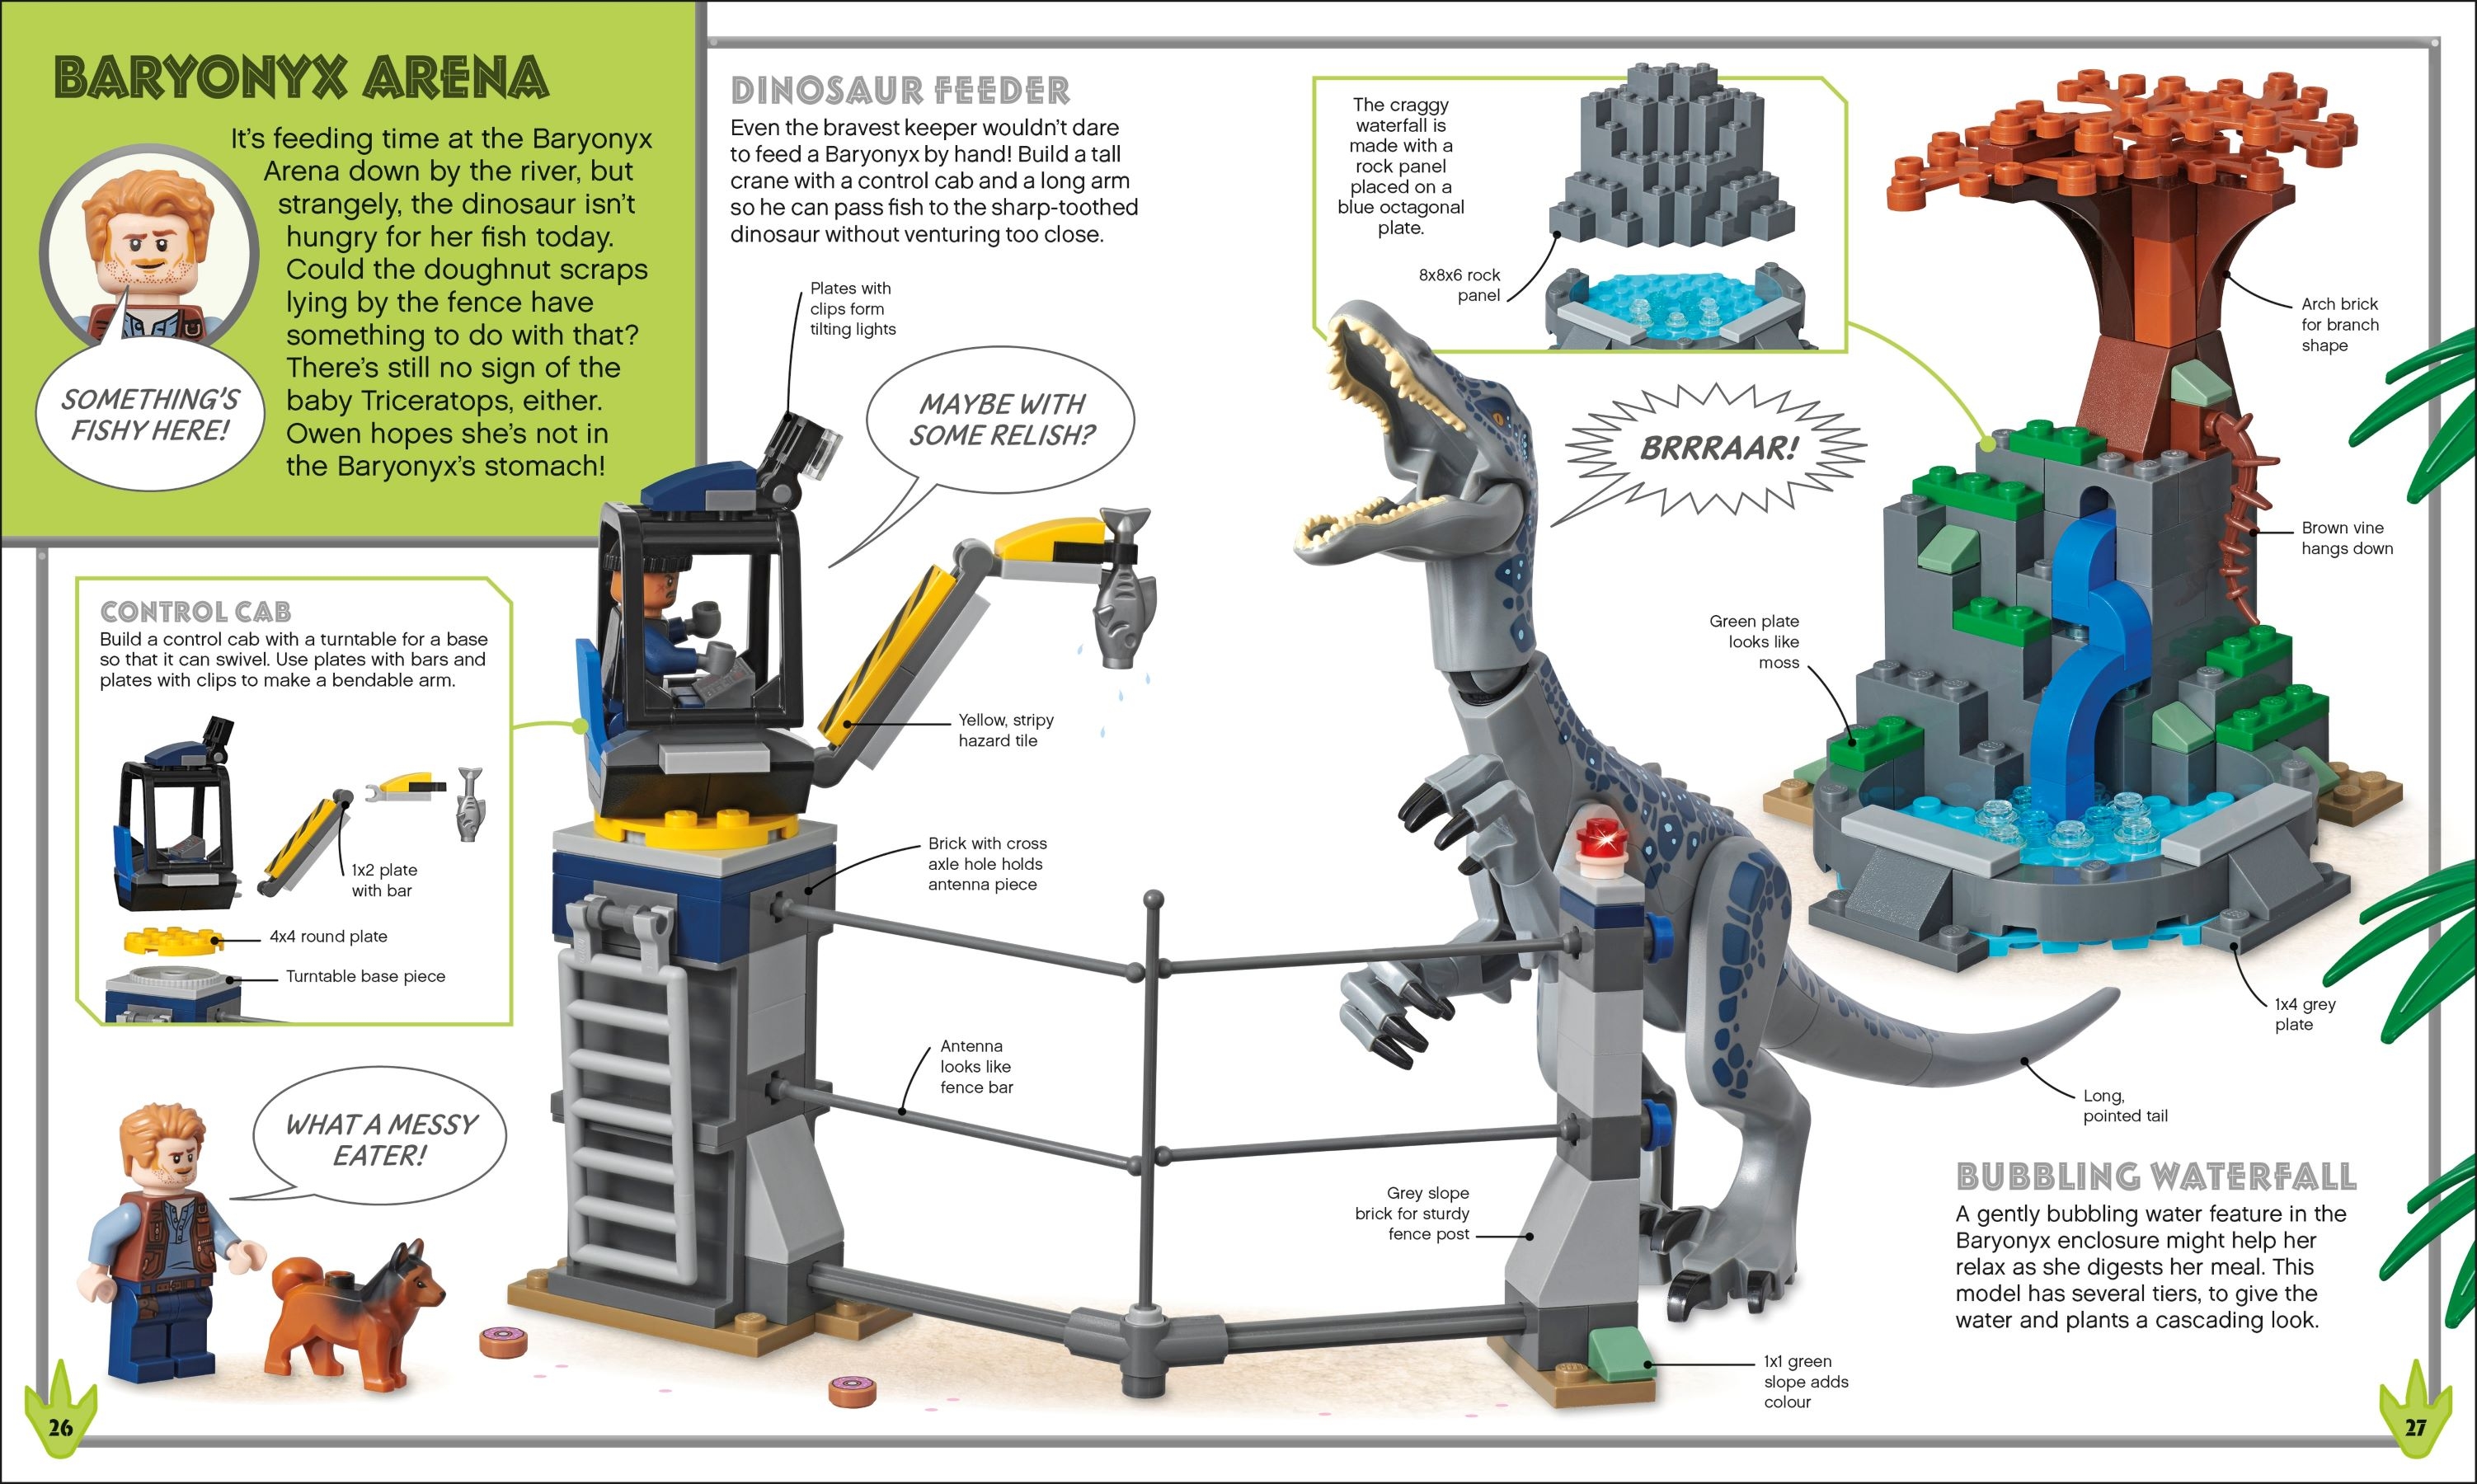 Lego Jurassic World Build Your Own Adventure Book and Building Toy